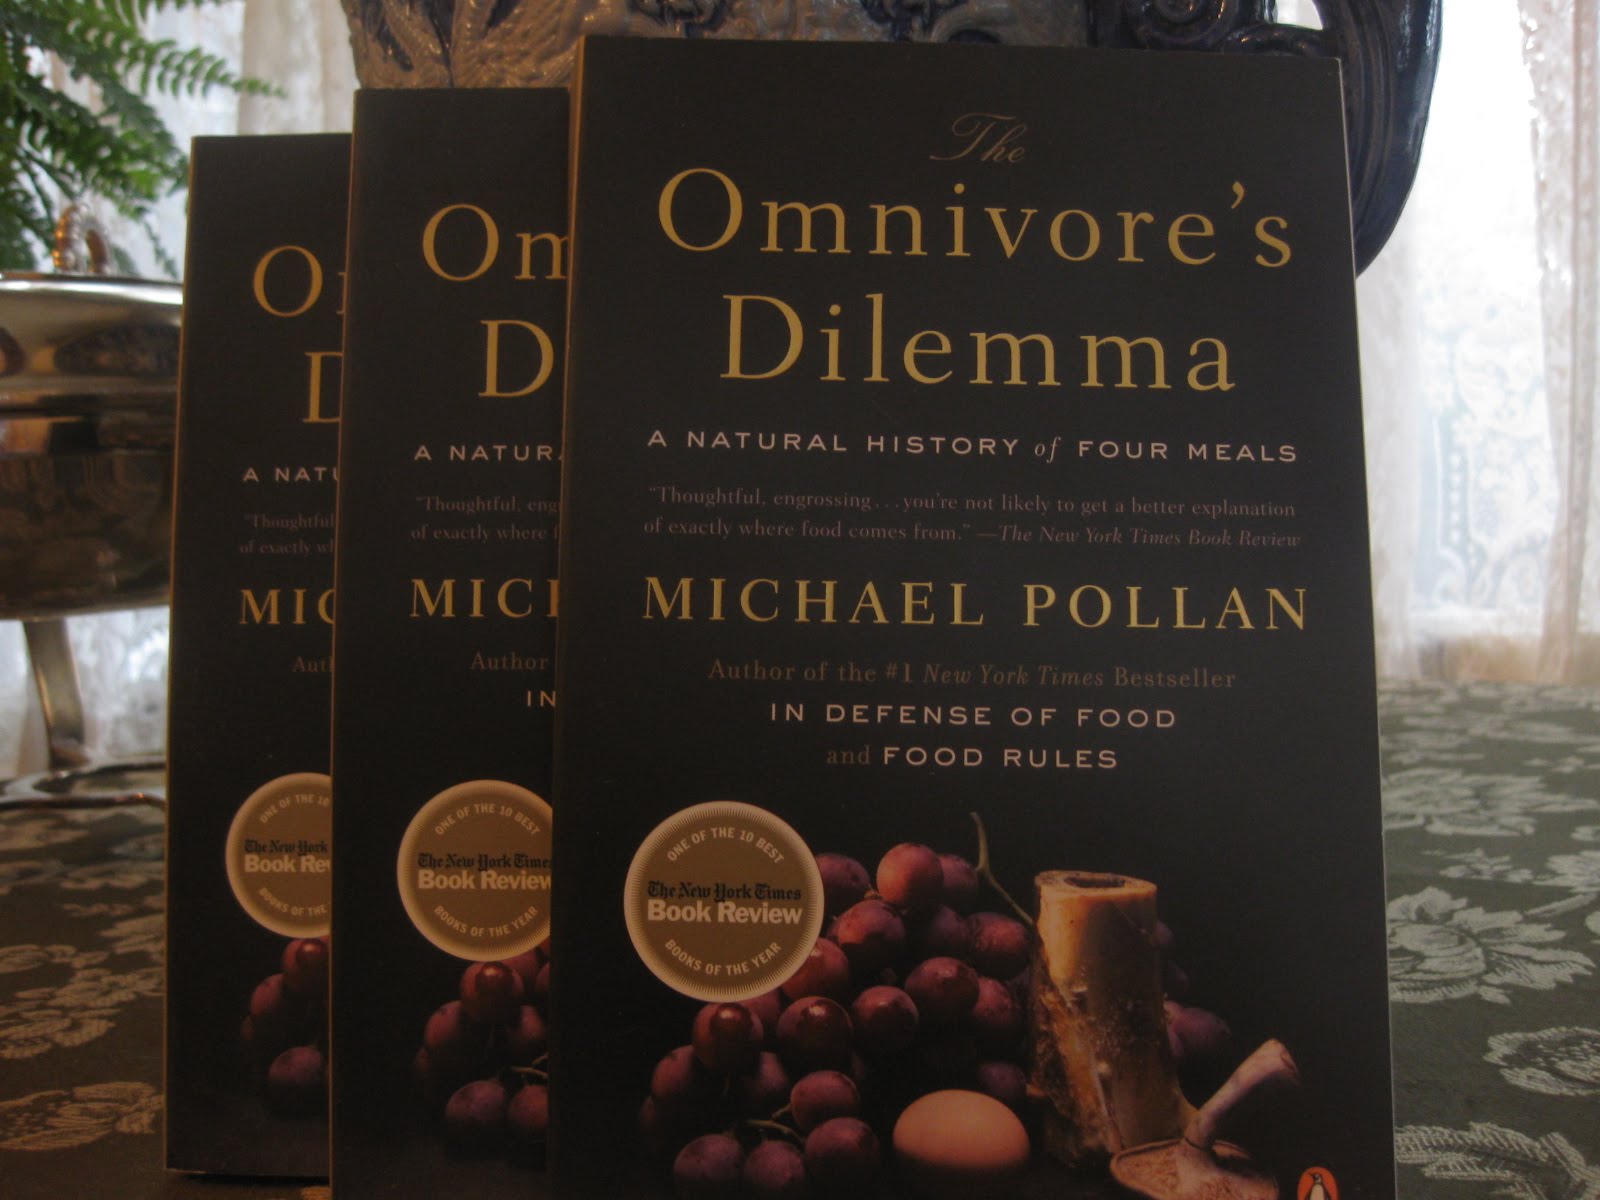 December Giveaway: The Omnivore's Dilemma